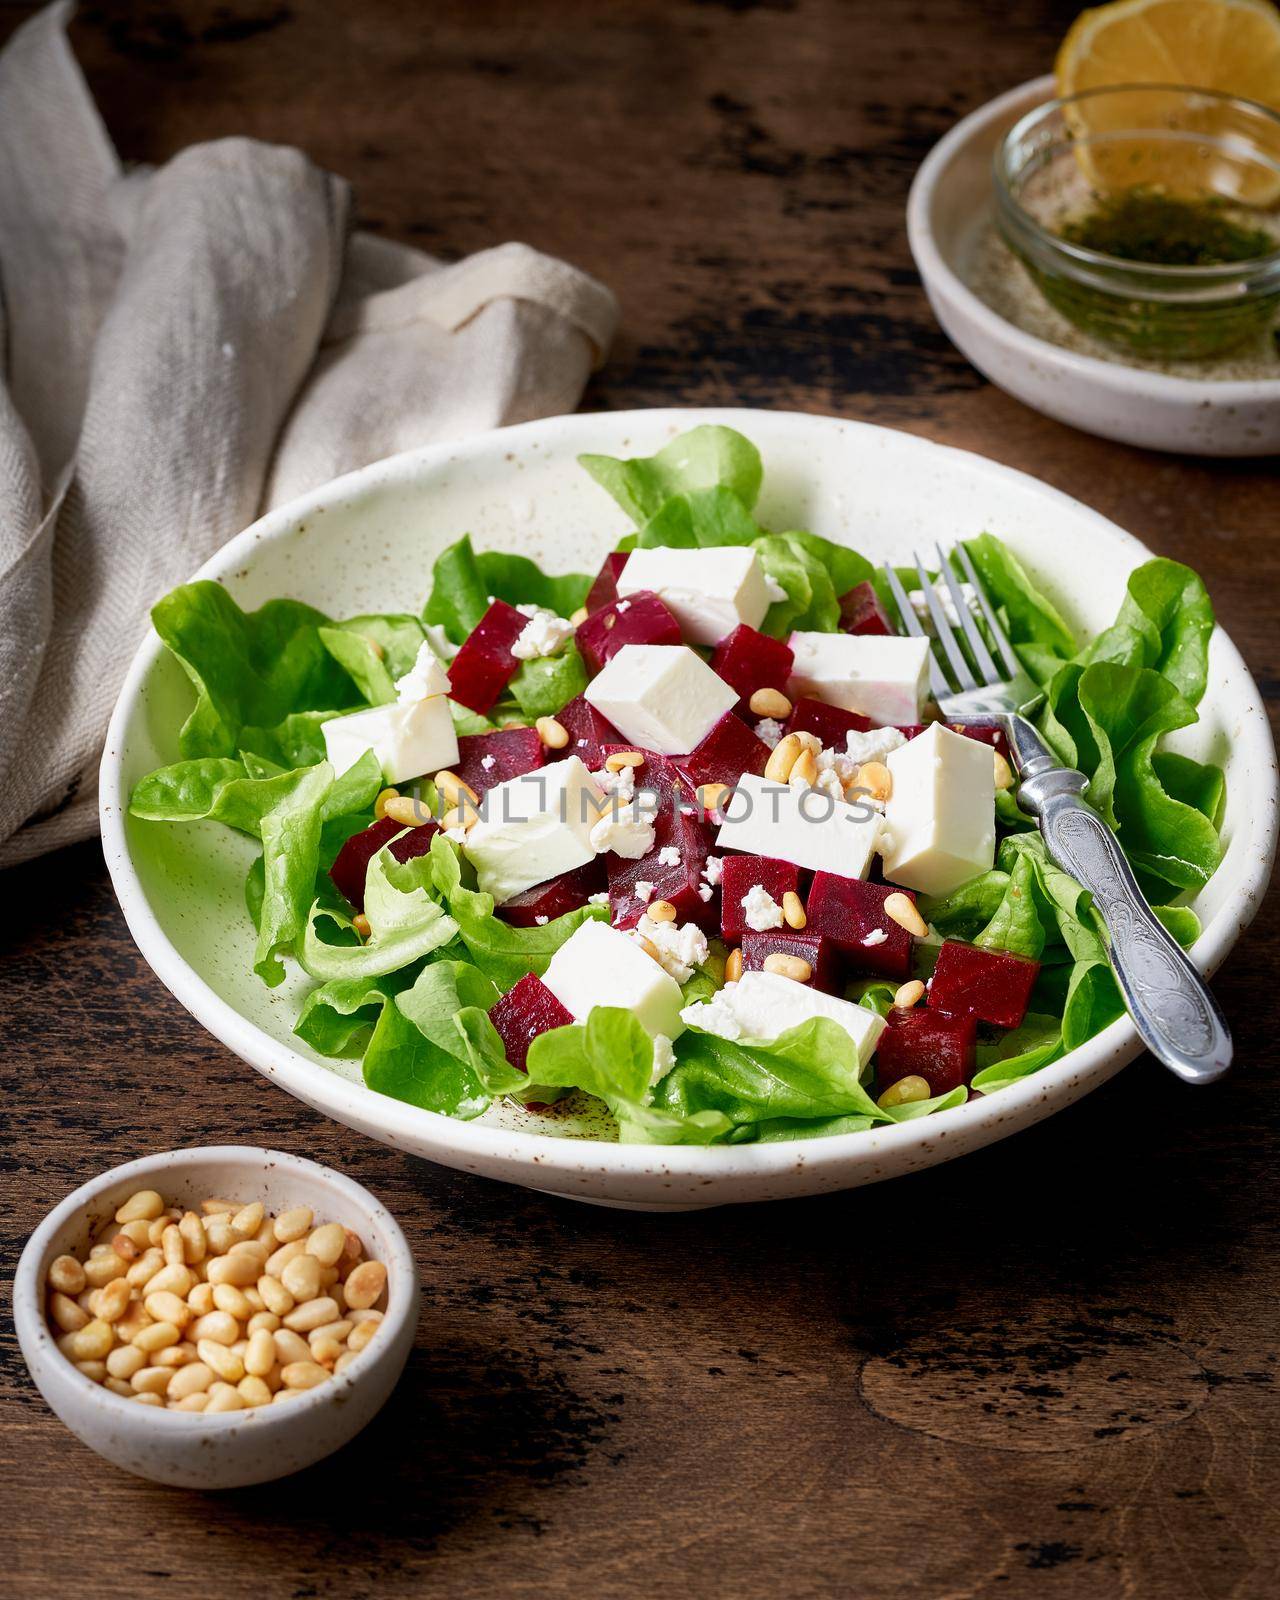 Healthy salad with beet, curd, feta and pine nuts, lettuce. Low carb keto ketogenic dash diet by NataBene